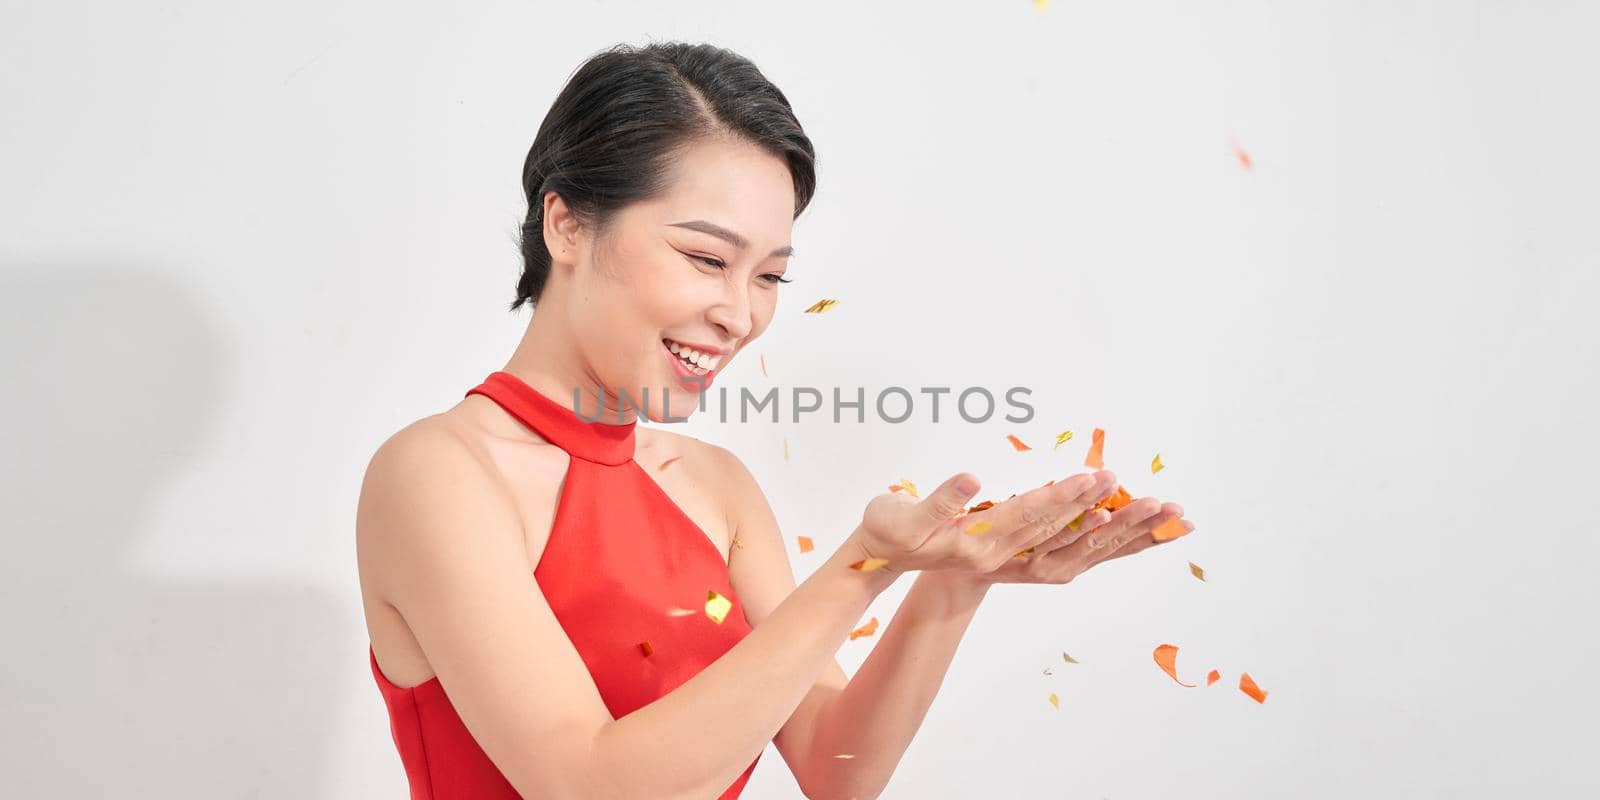 pretty woman blows confetti in the air wearing red dress isolated over white by makidotvn